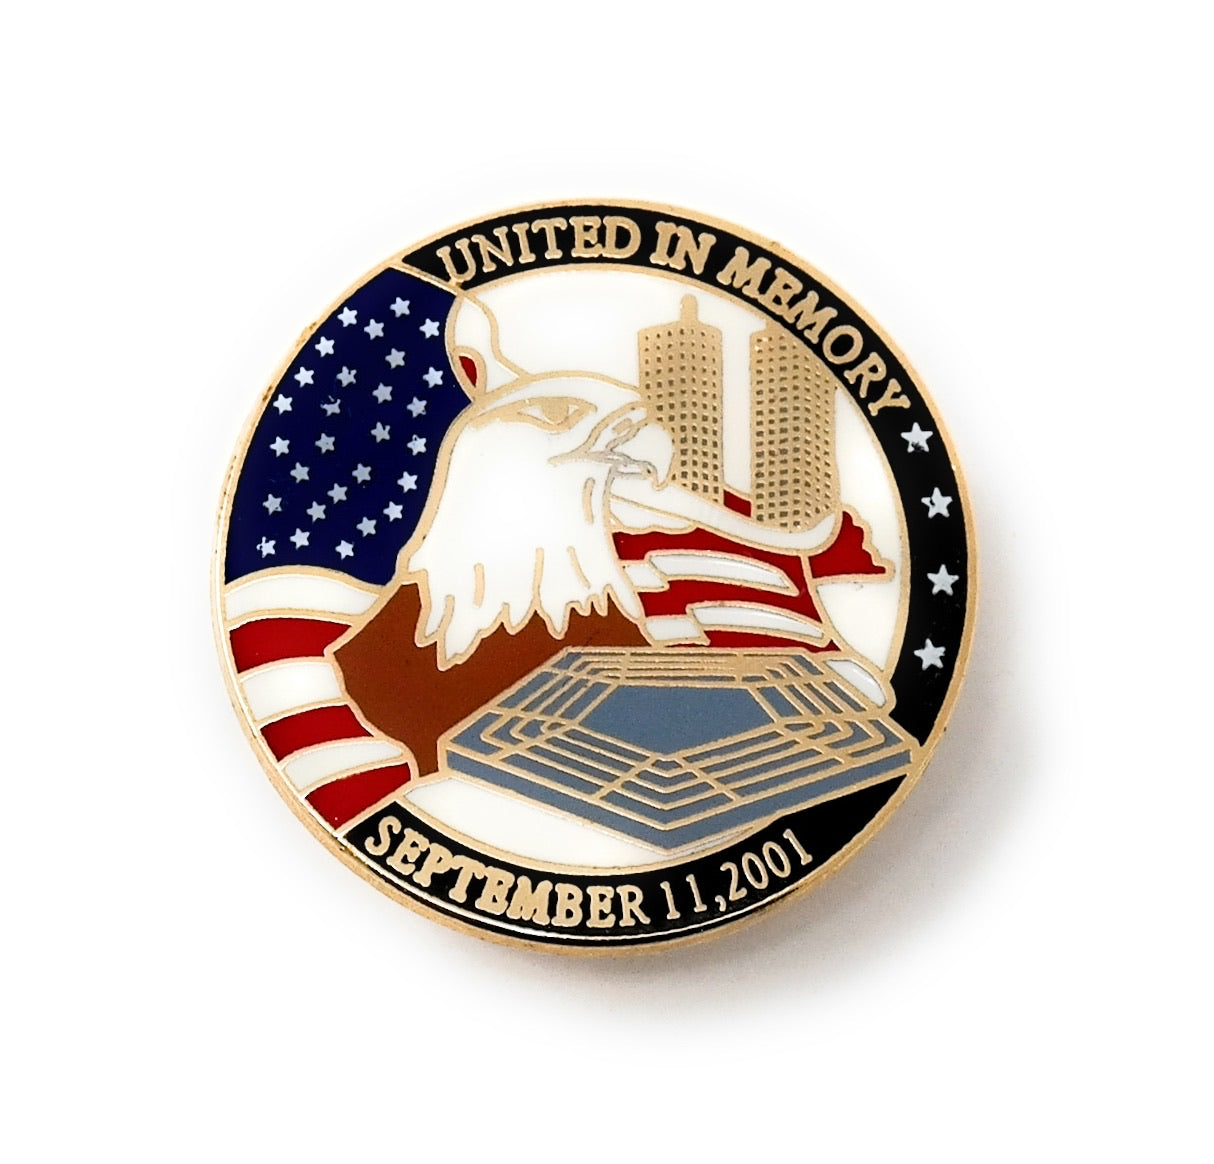 9/11 'United in Memory' Collectable Lapel Pin